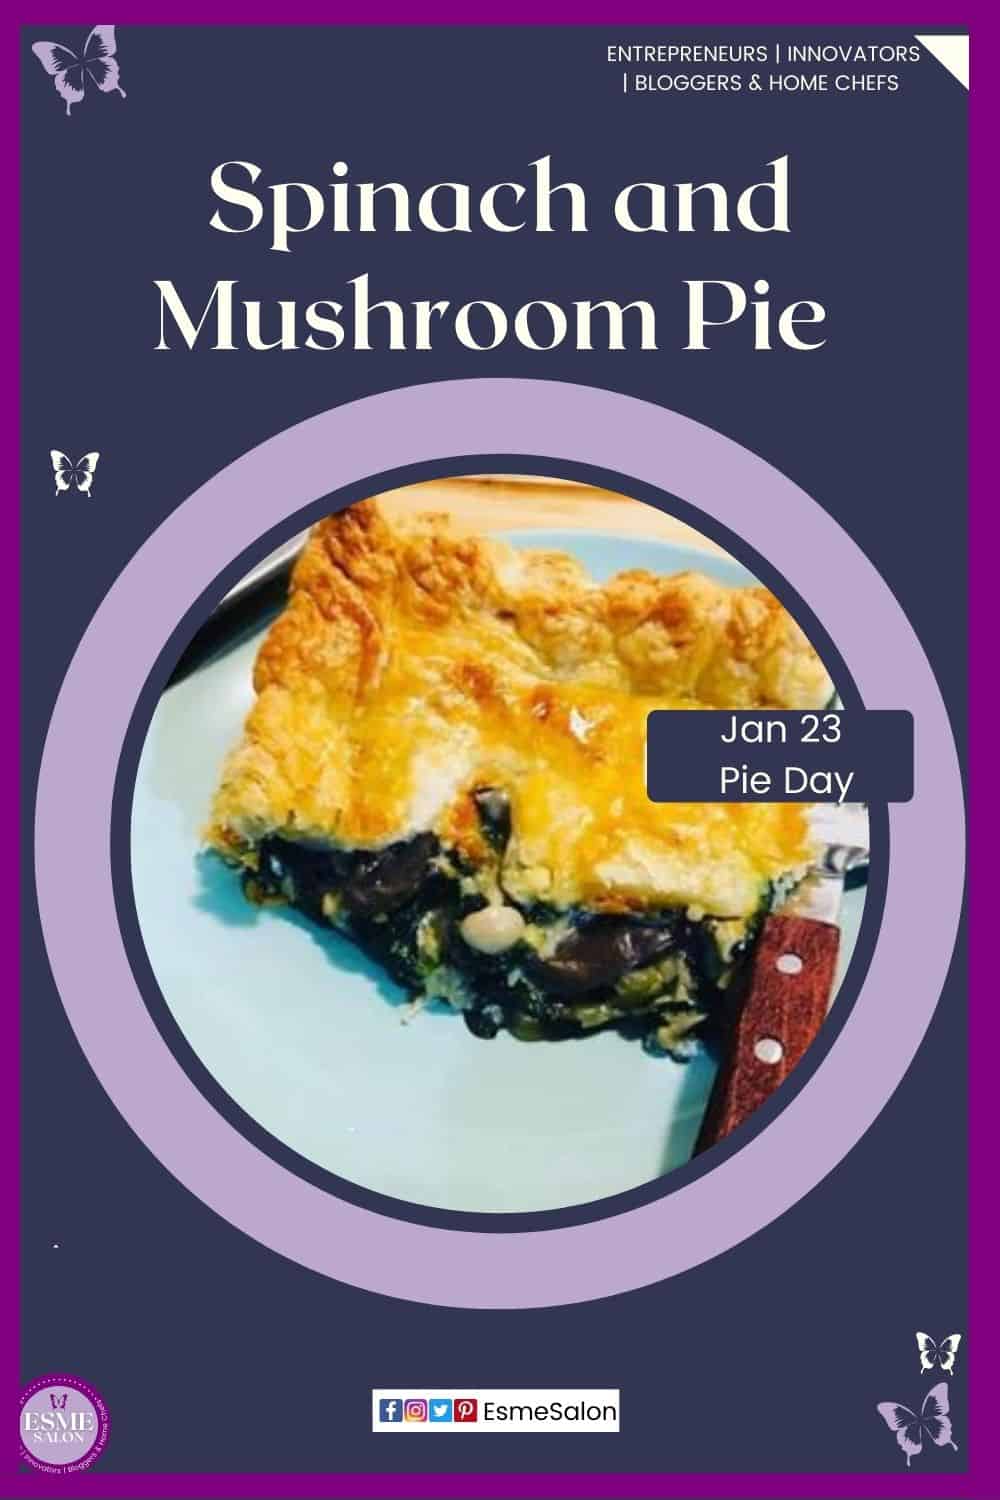 an image of a Spinach and Mushroom Pie